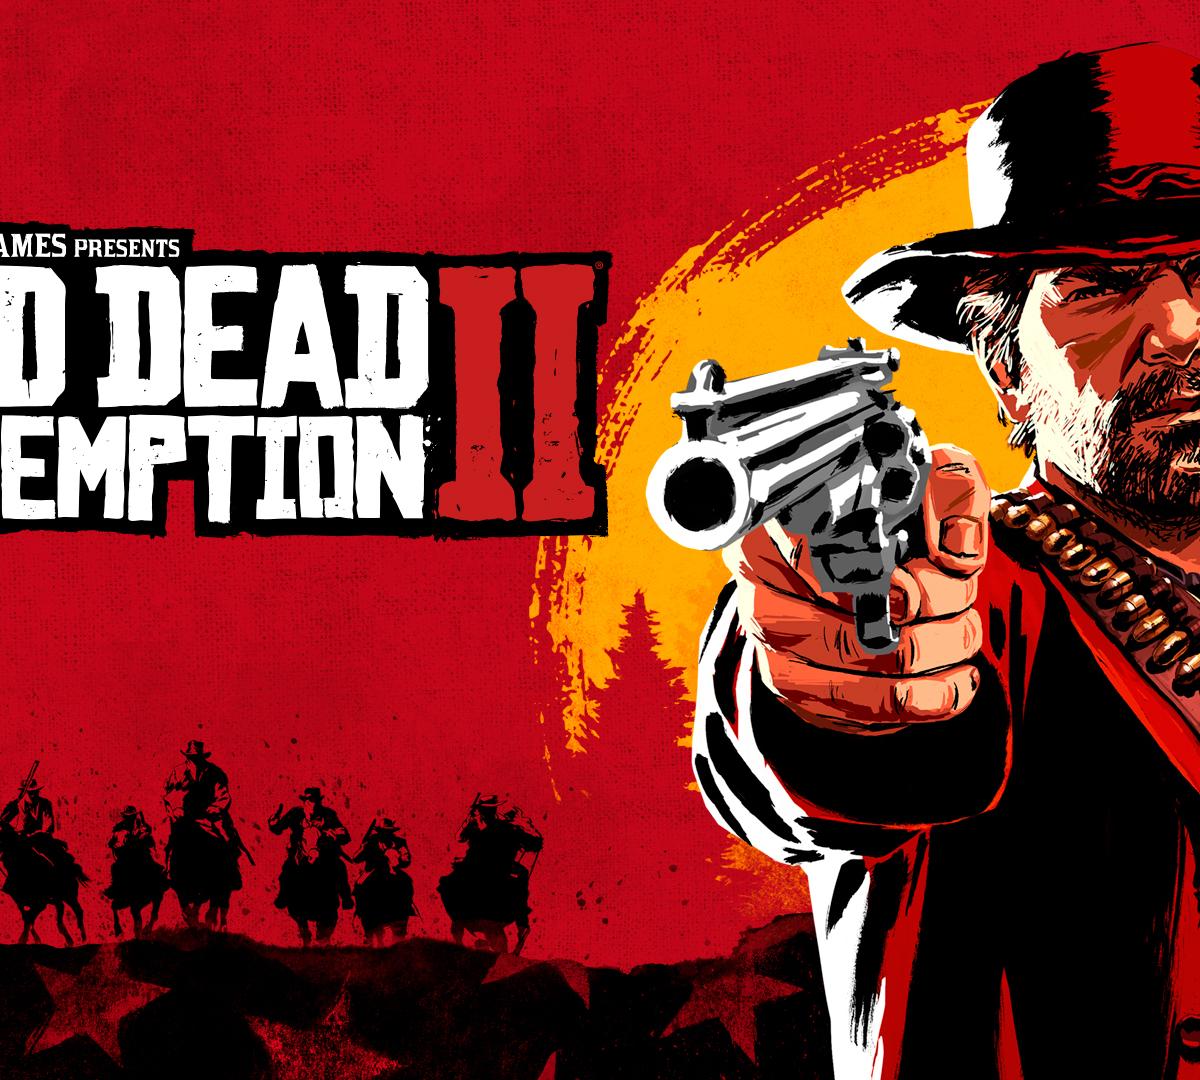 Video Game review: “Red Dead Redemption 2” sets new standard for